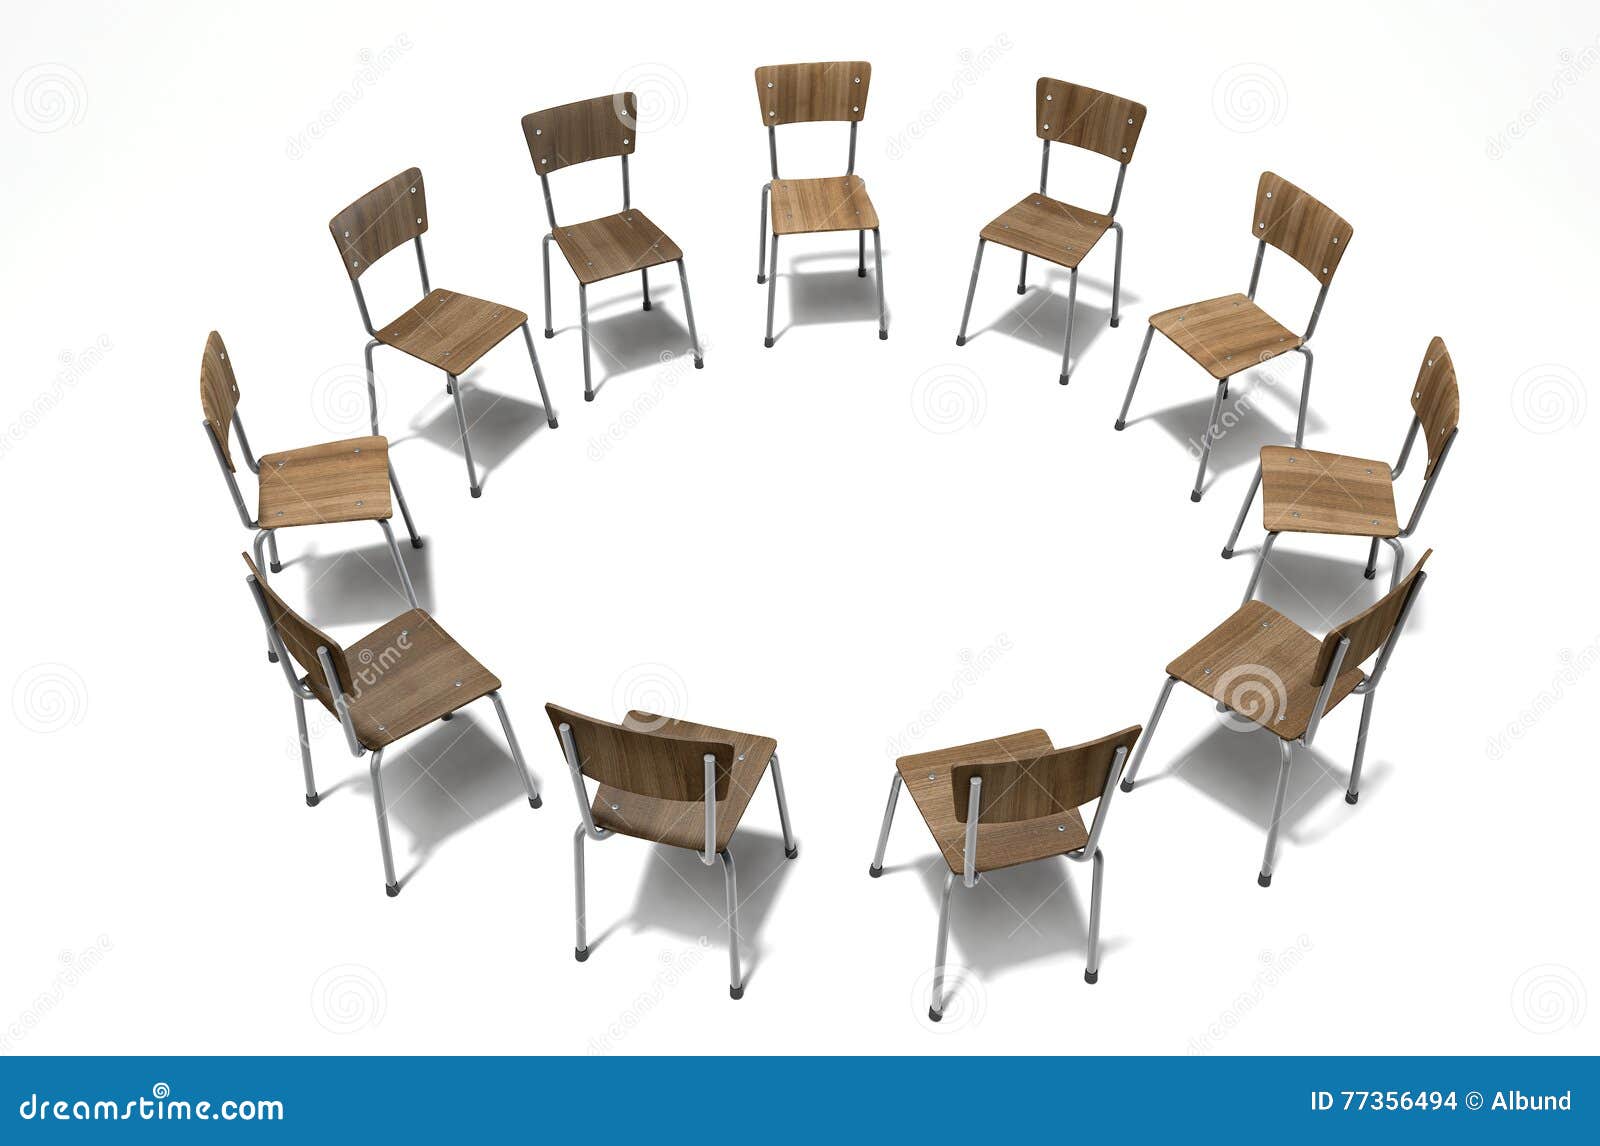 group therapy chairs